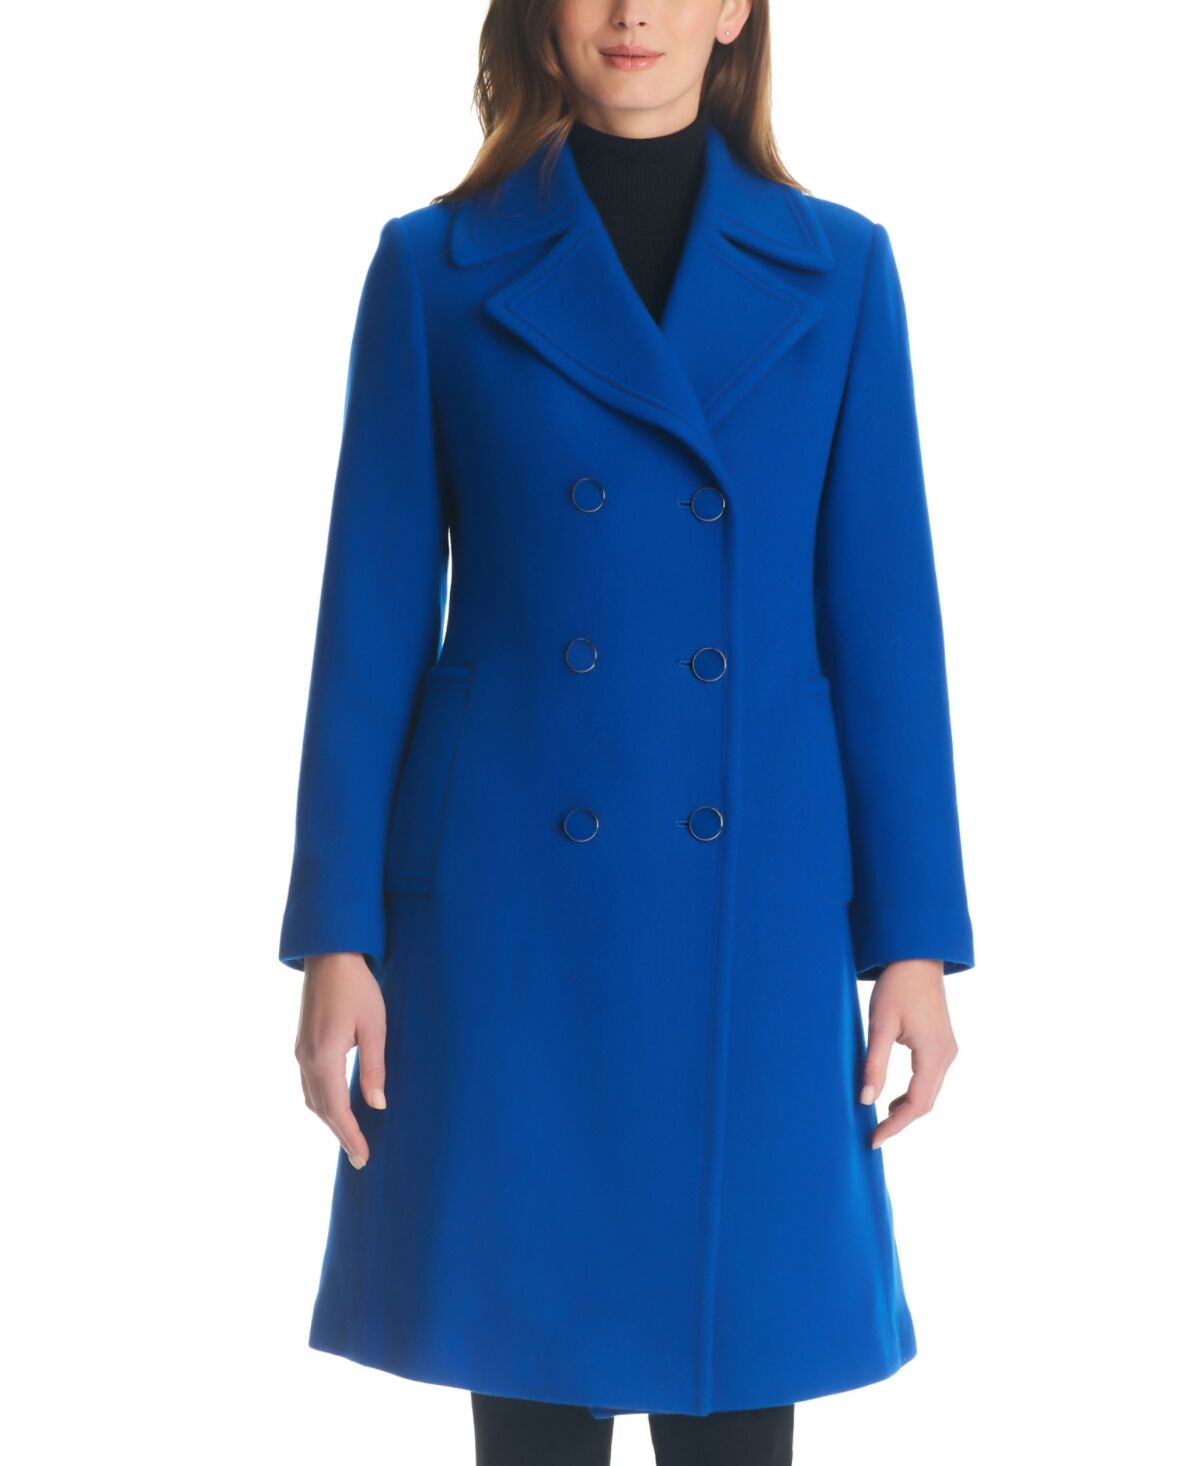 Kate Spade New York Women's Double-Breasted Wool Blend Peacoat - Stained Glass Blue